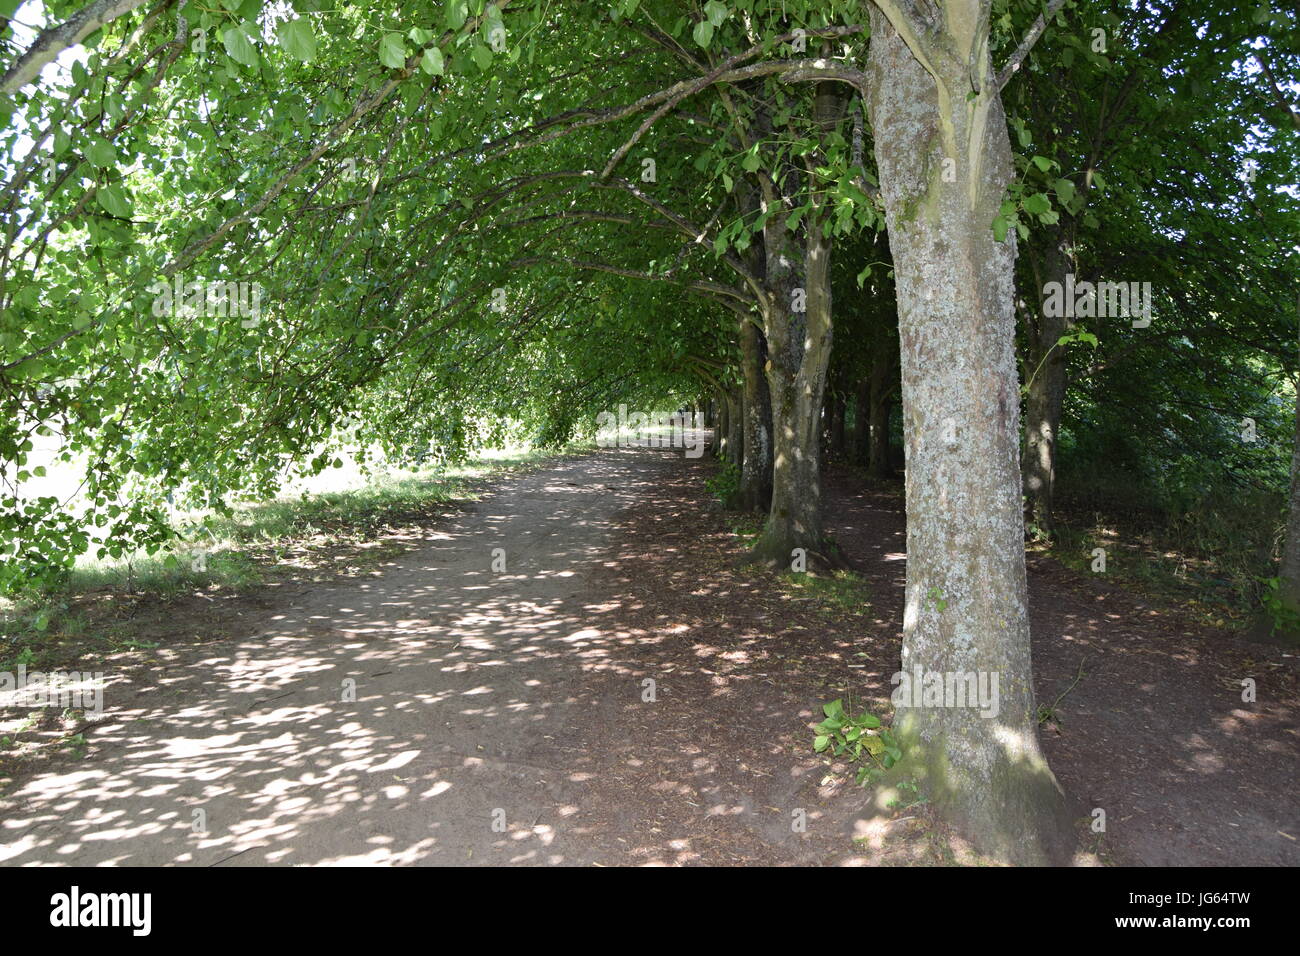 A stroll round Coate Water, site seeing Stock Photo